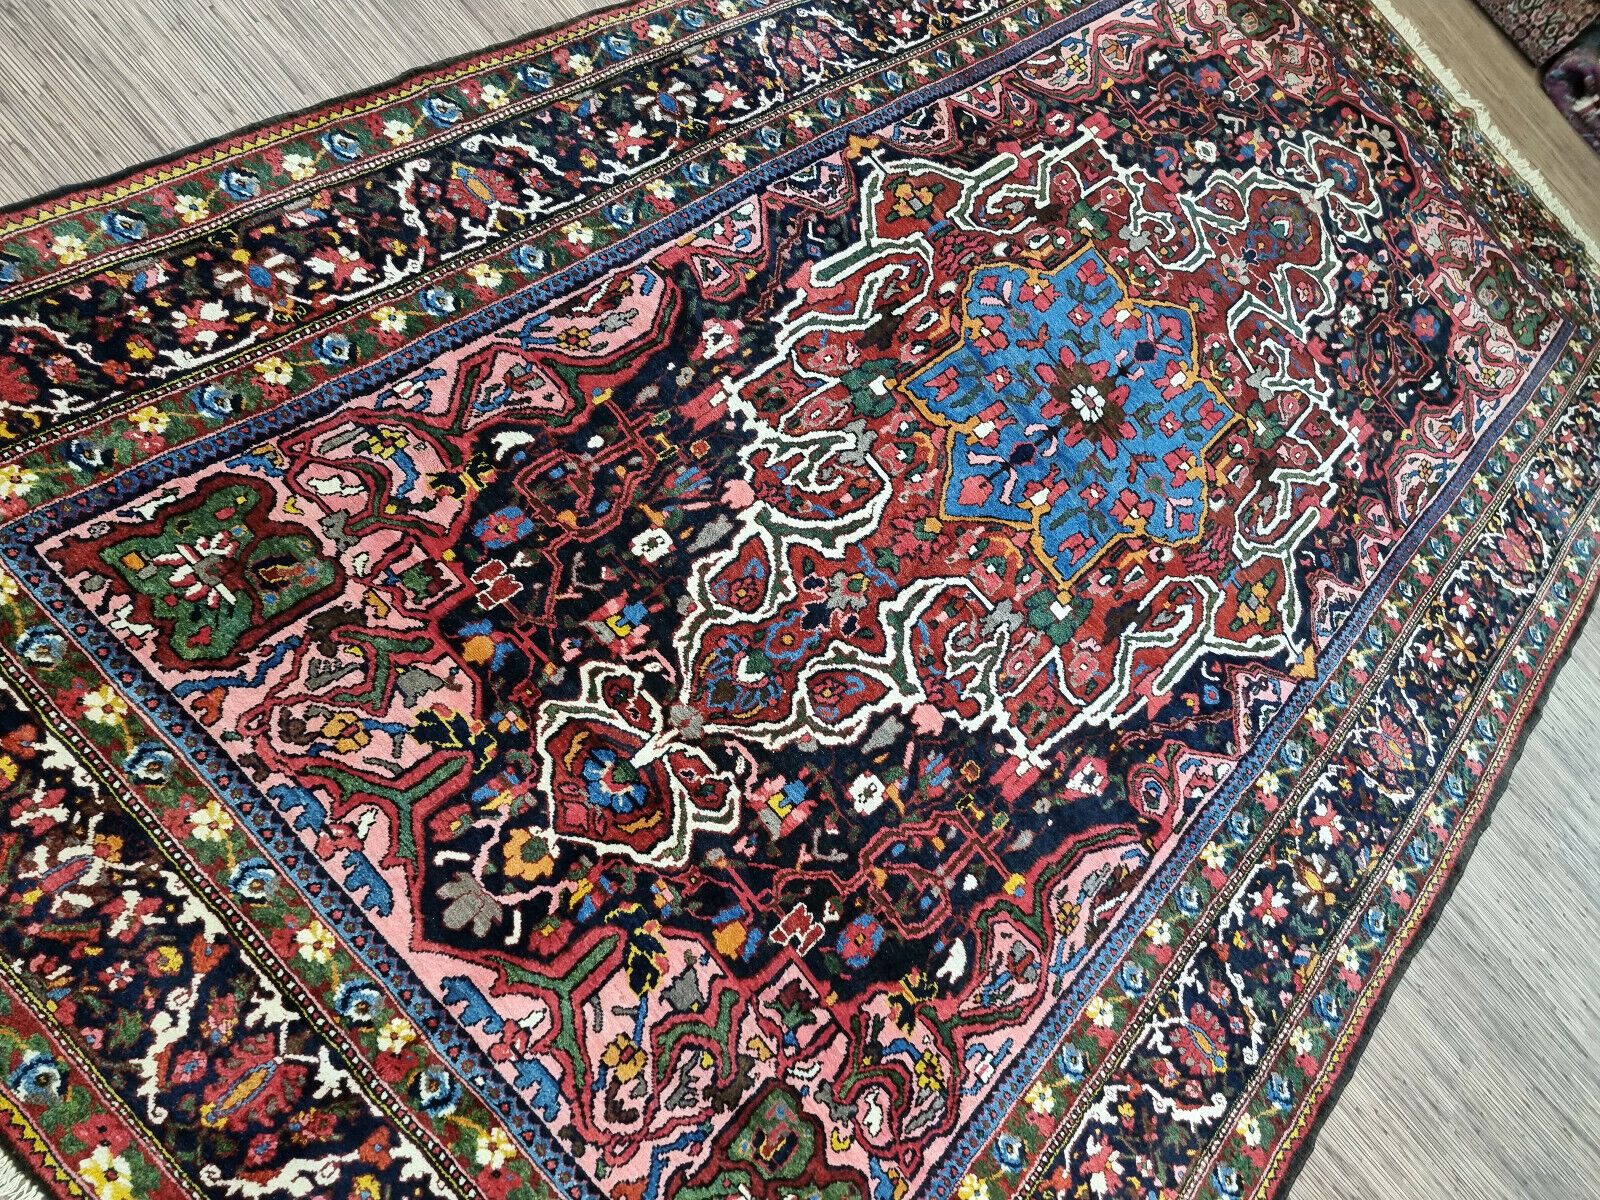 Close-up of Persian artistry on Handmade Antique Persian Bakhtiari Rug - Detailed view showcasing the artistic mastery and craftsmanship characteristic of Persian rugs.